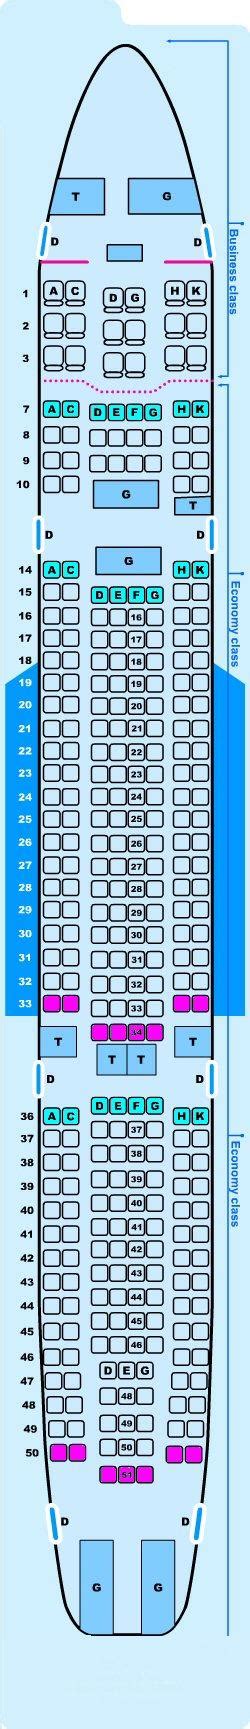 Delta Airbus A330 Seat Map Updated Find The Best Seat